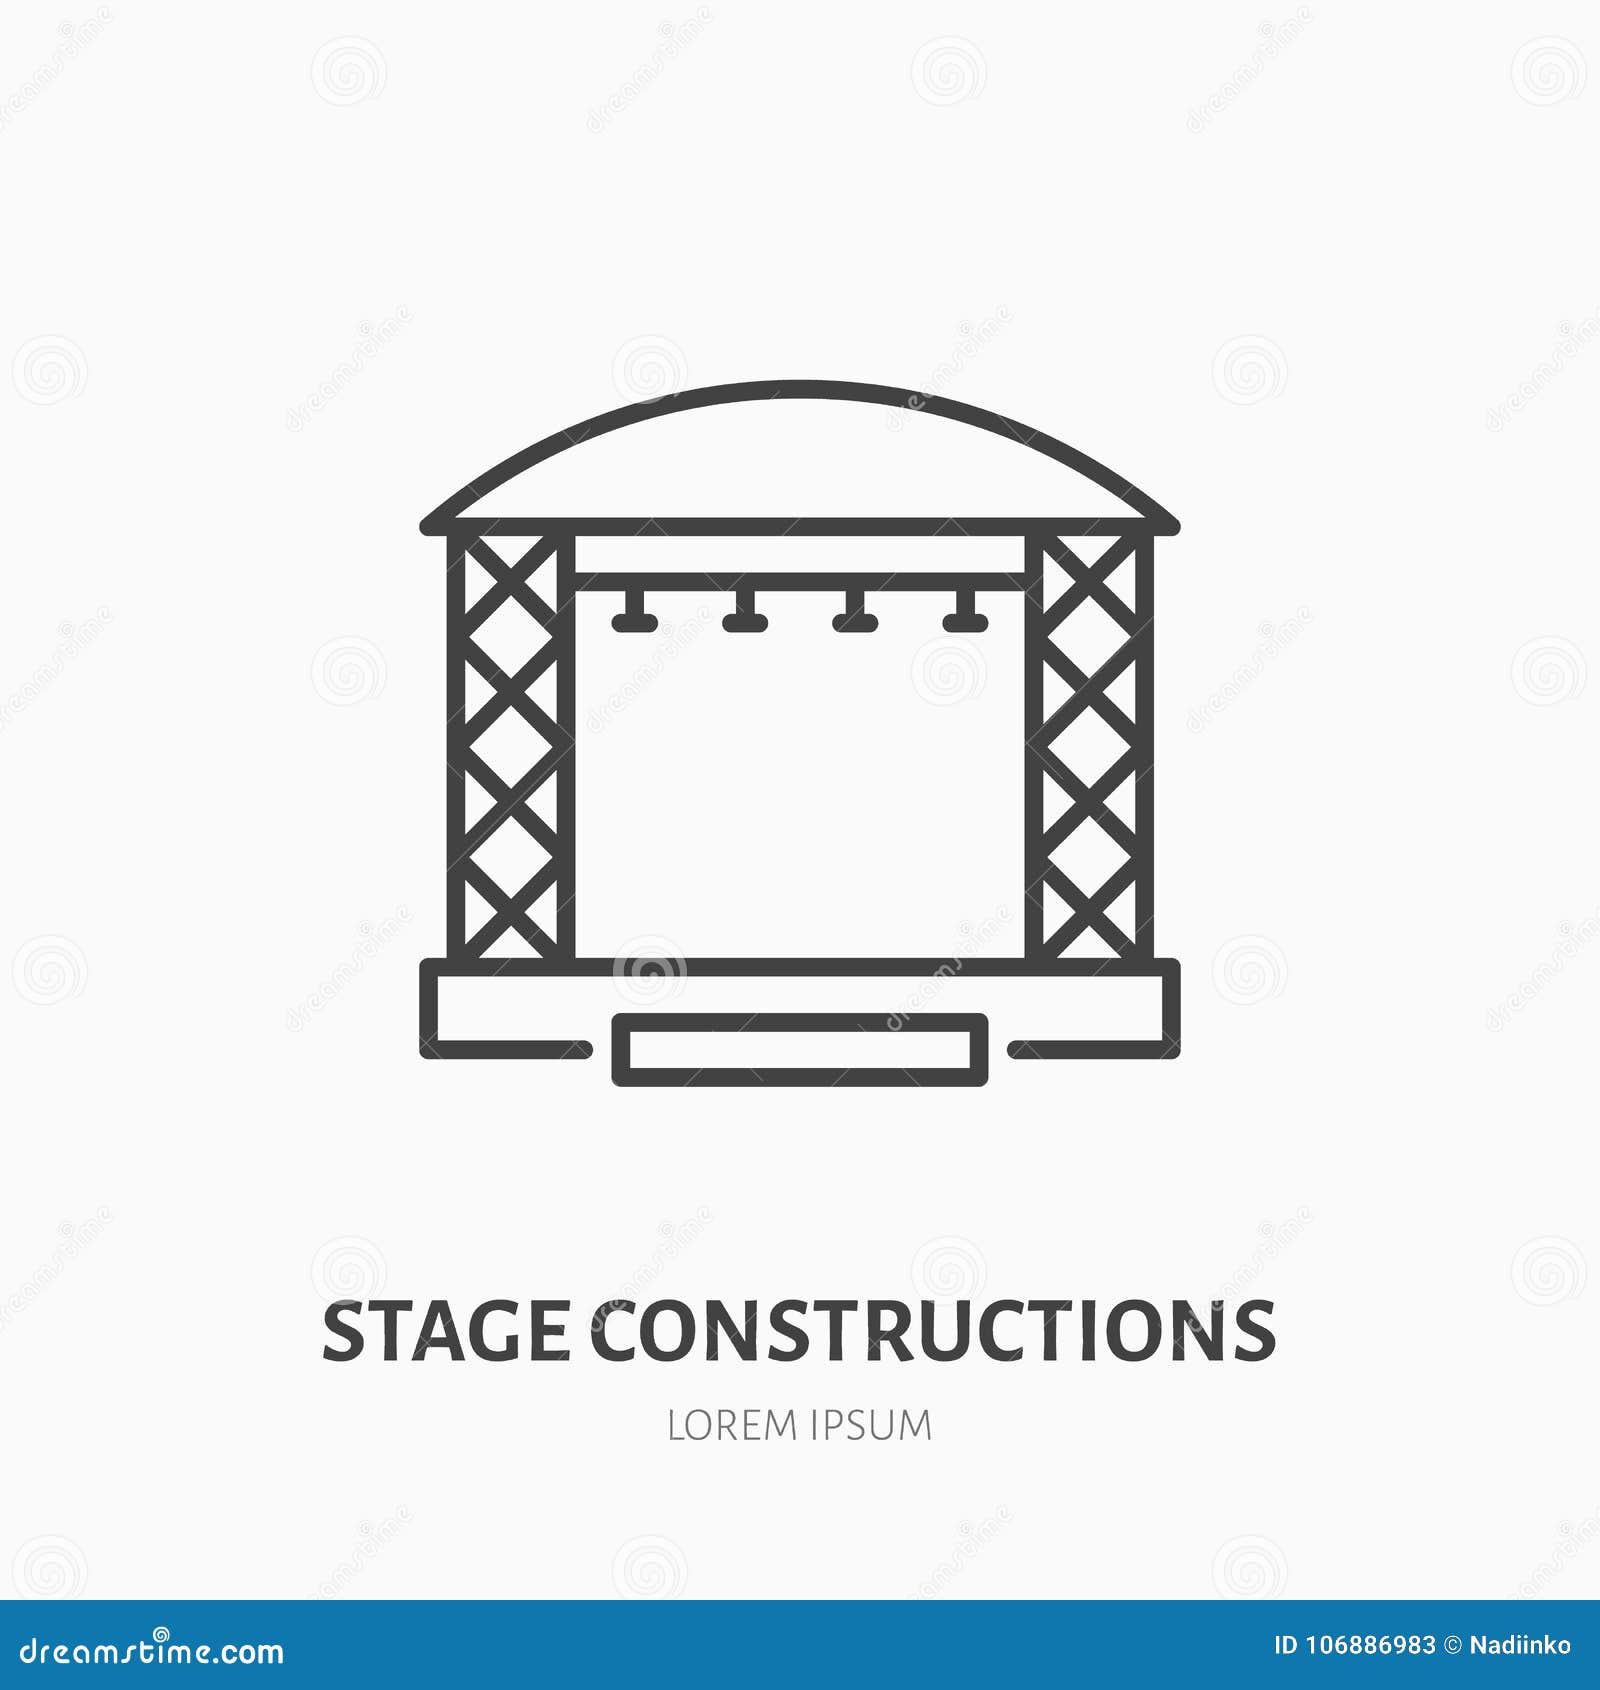 stage constructions flat line icon. scene, event equipment rental sign. thin linear logo for concert, music festival